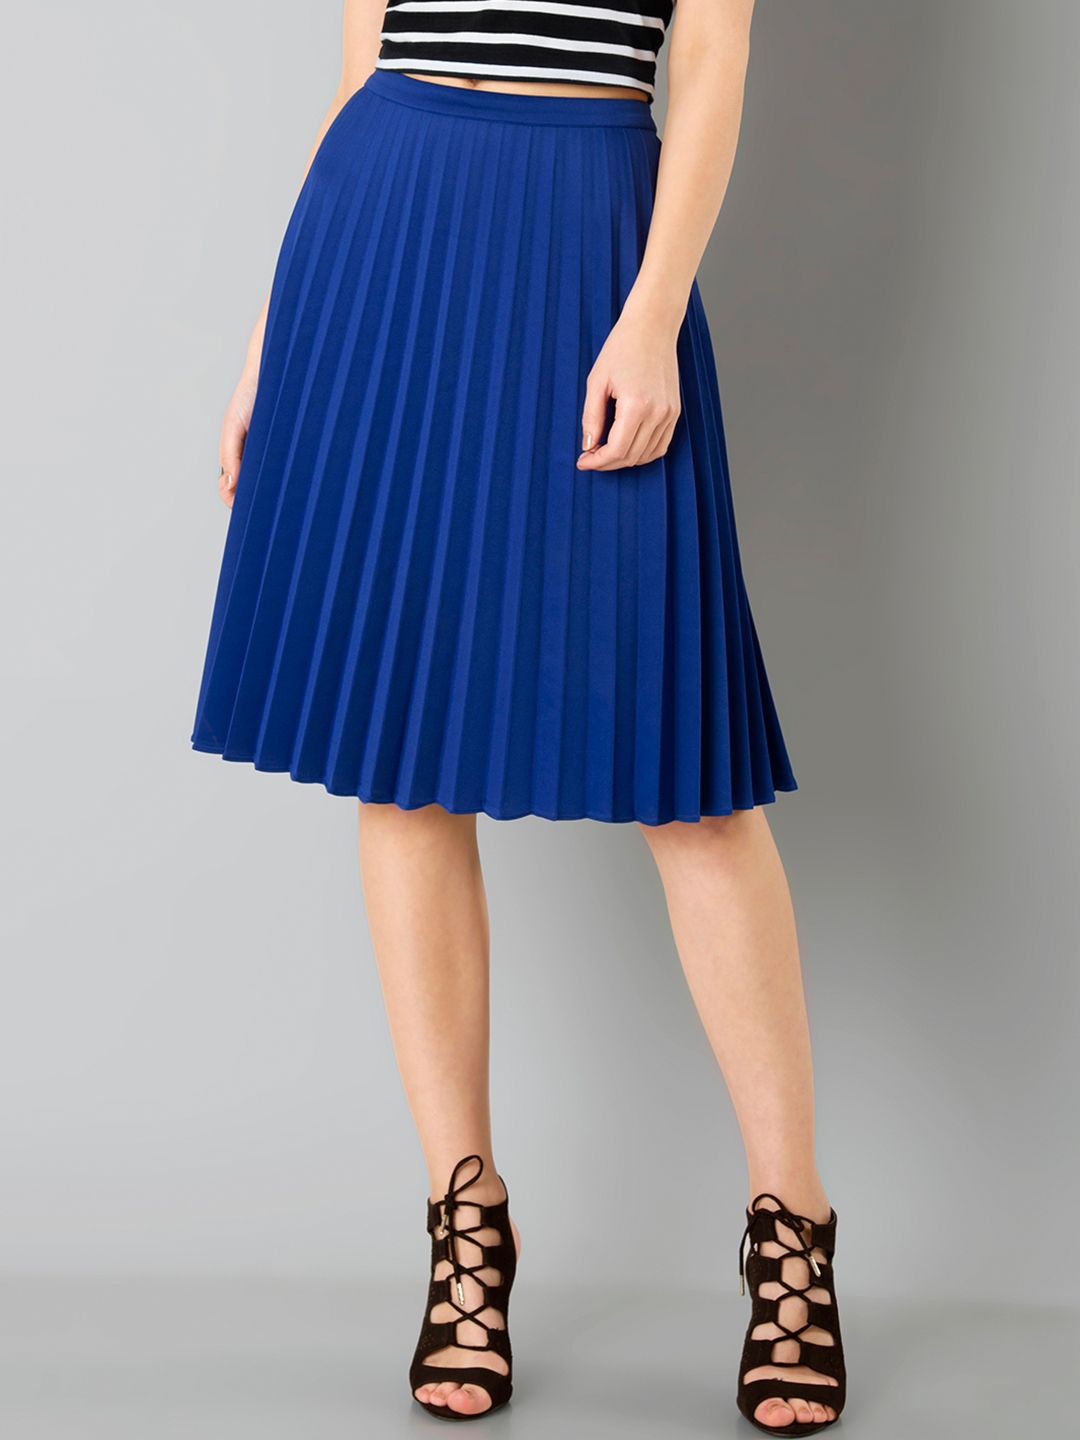 Buy FabAlley Blue Pleated A Line Skirt - Skirts for Women 1822553 | Myntra